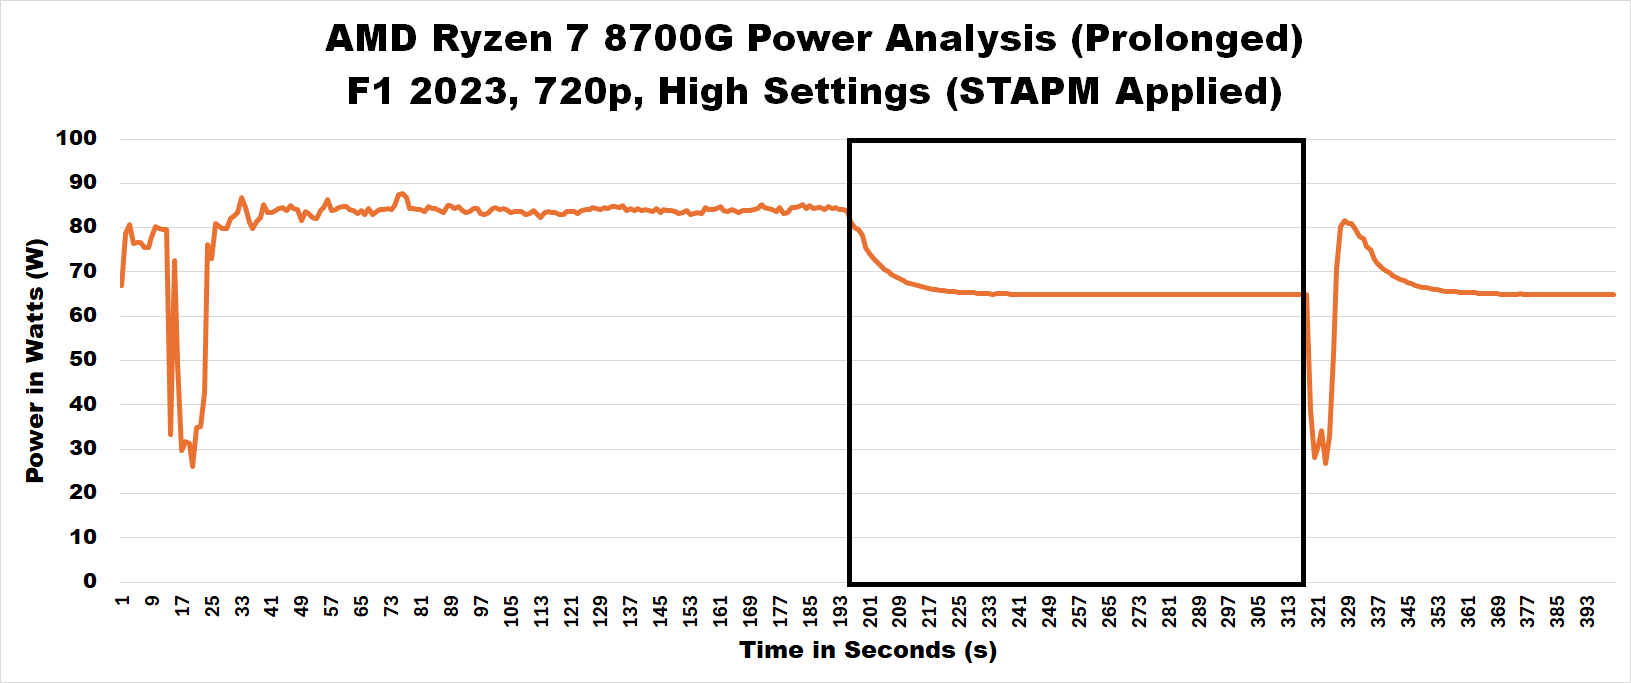 AMD Ryzen 7 8700G Power Analysis With STAPM Applied.png